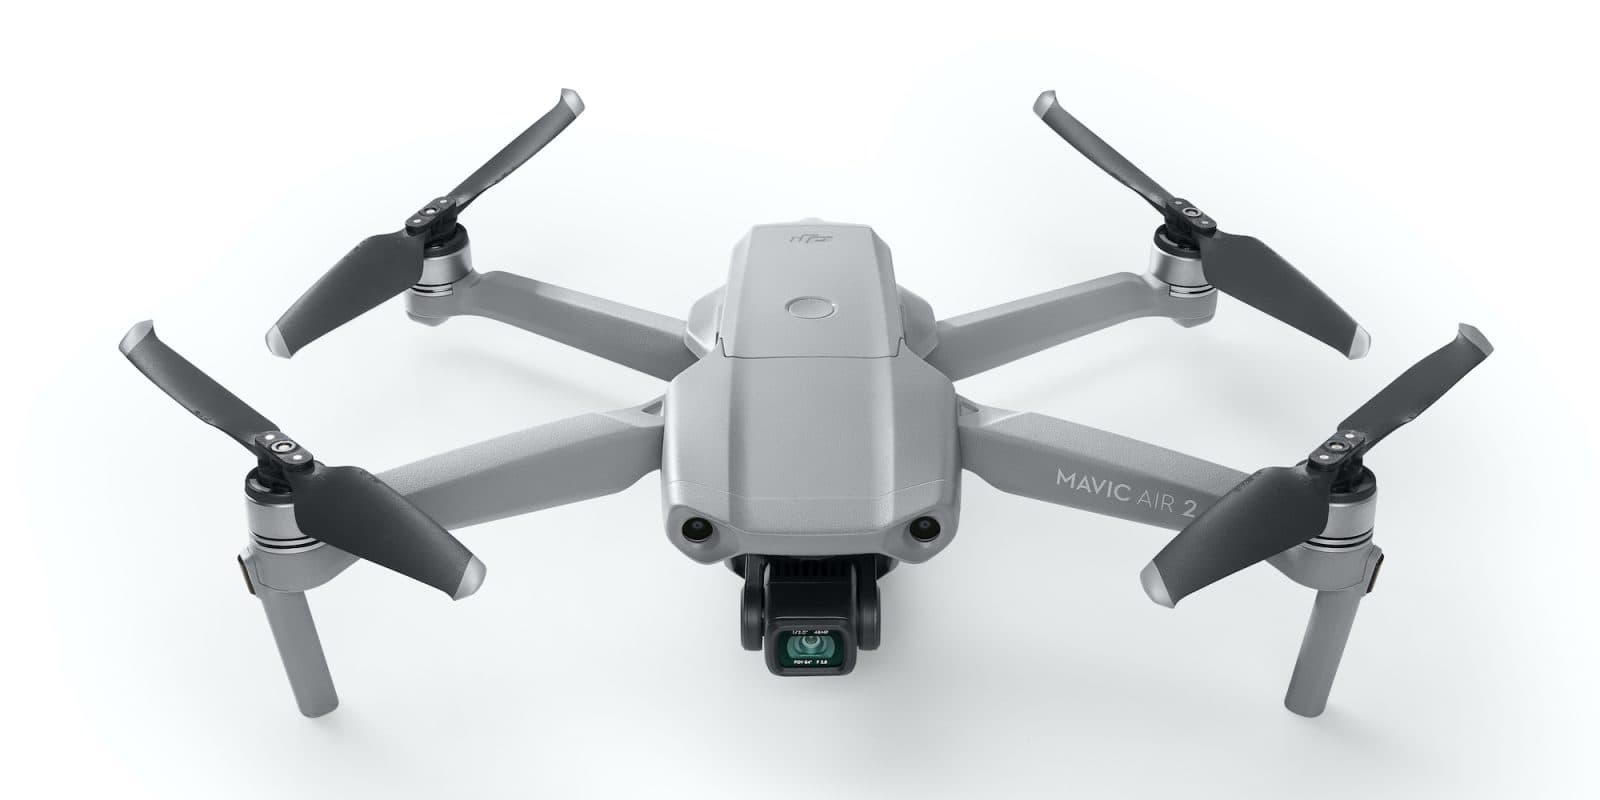 DJI's Latest Mavic Air 2 Comes With An Improved Camera